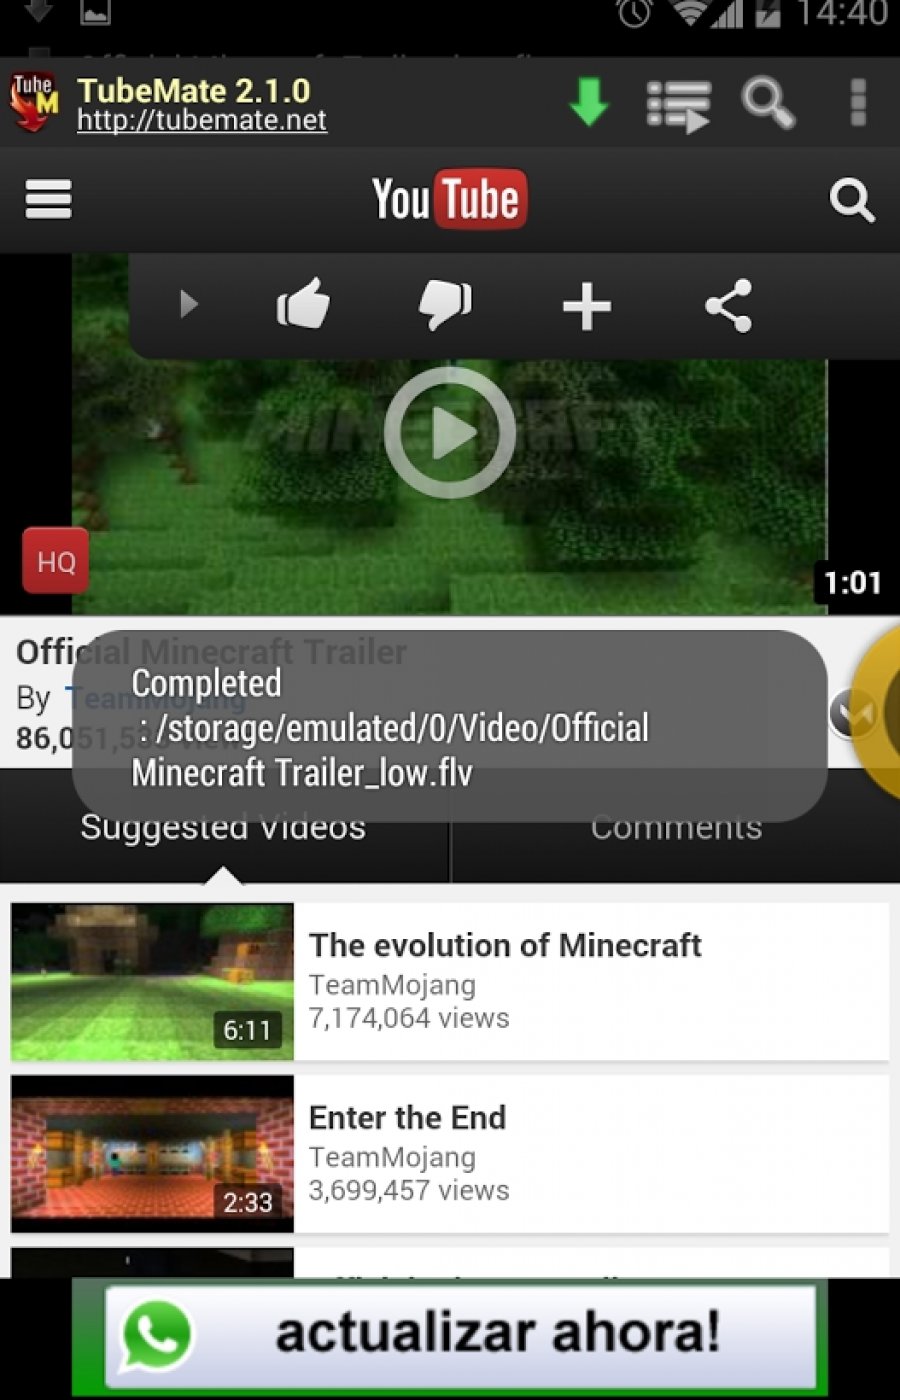 TubeMate YouTube Downloader APK 2.4.30 for Android – Download TubeMate  YouTube Downloader APK Latest Version from APKFab.com